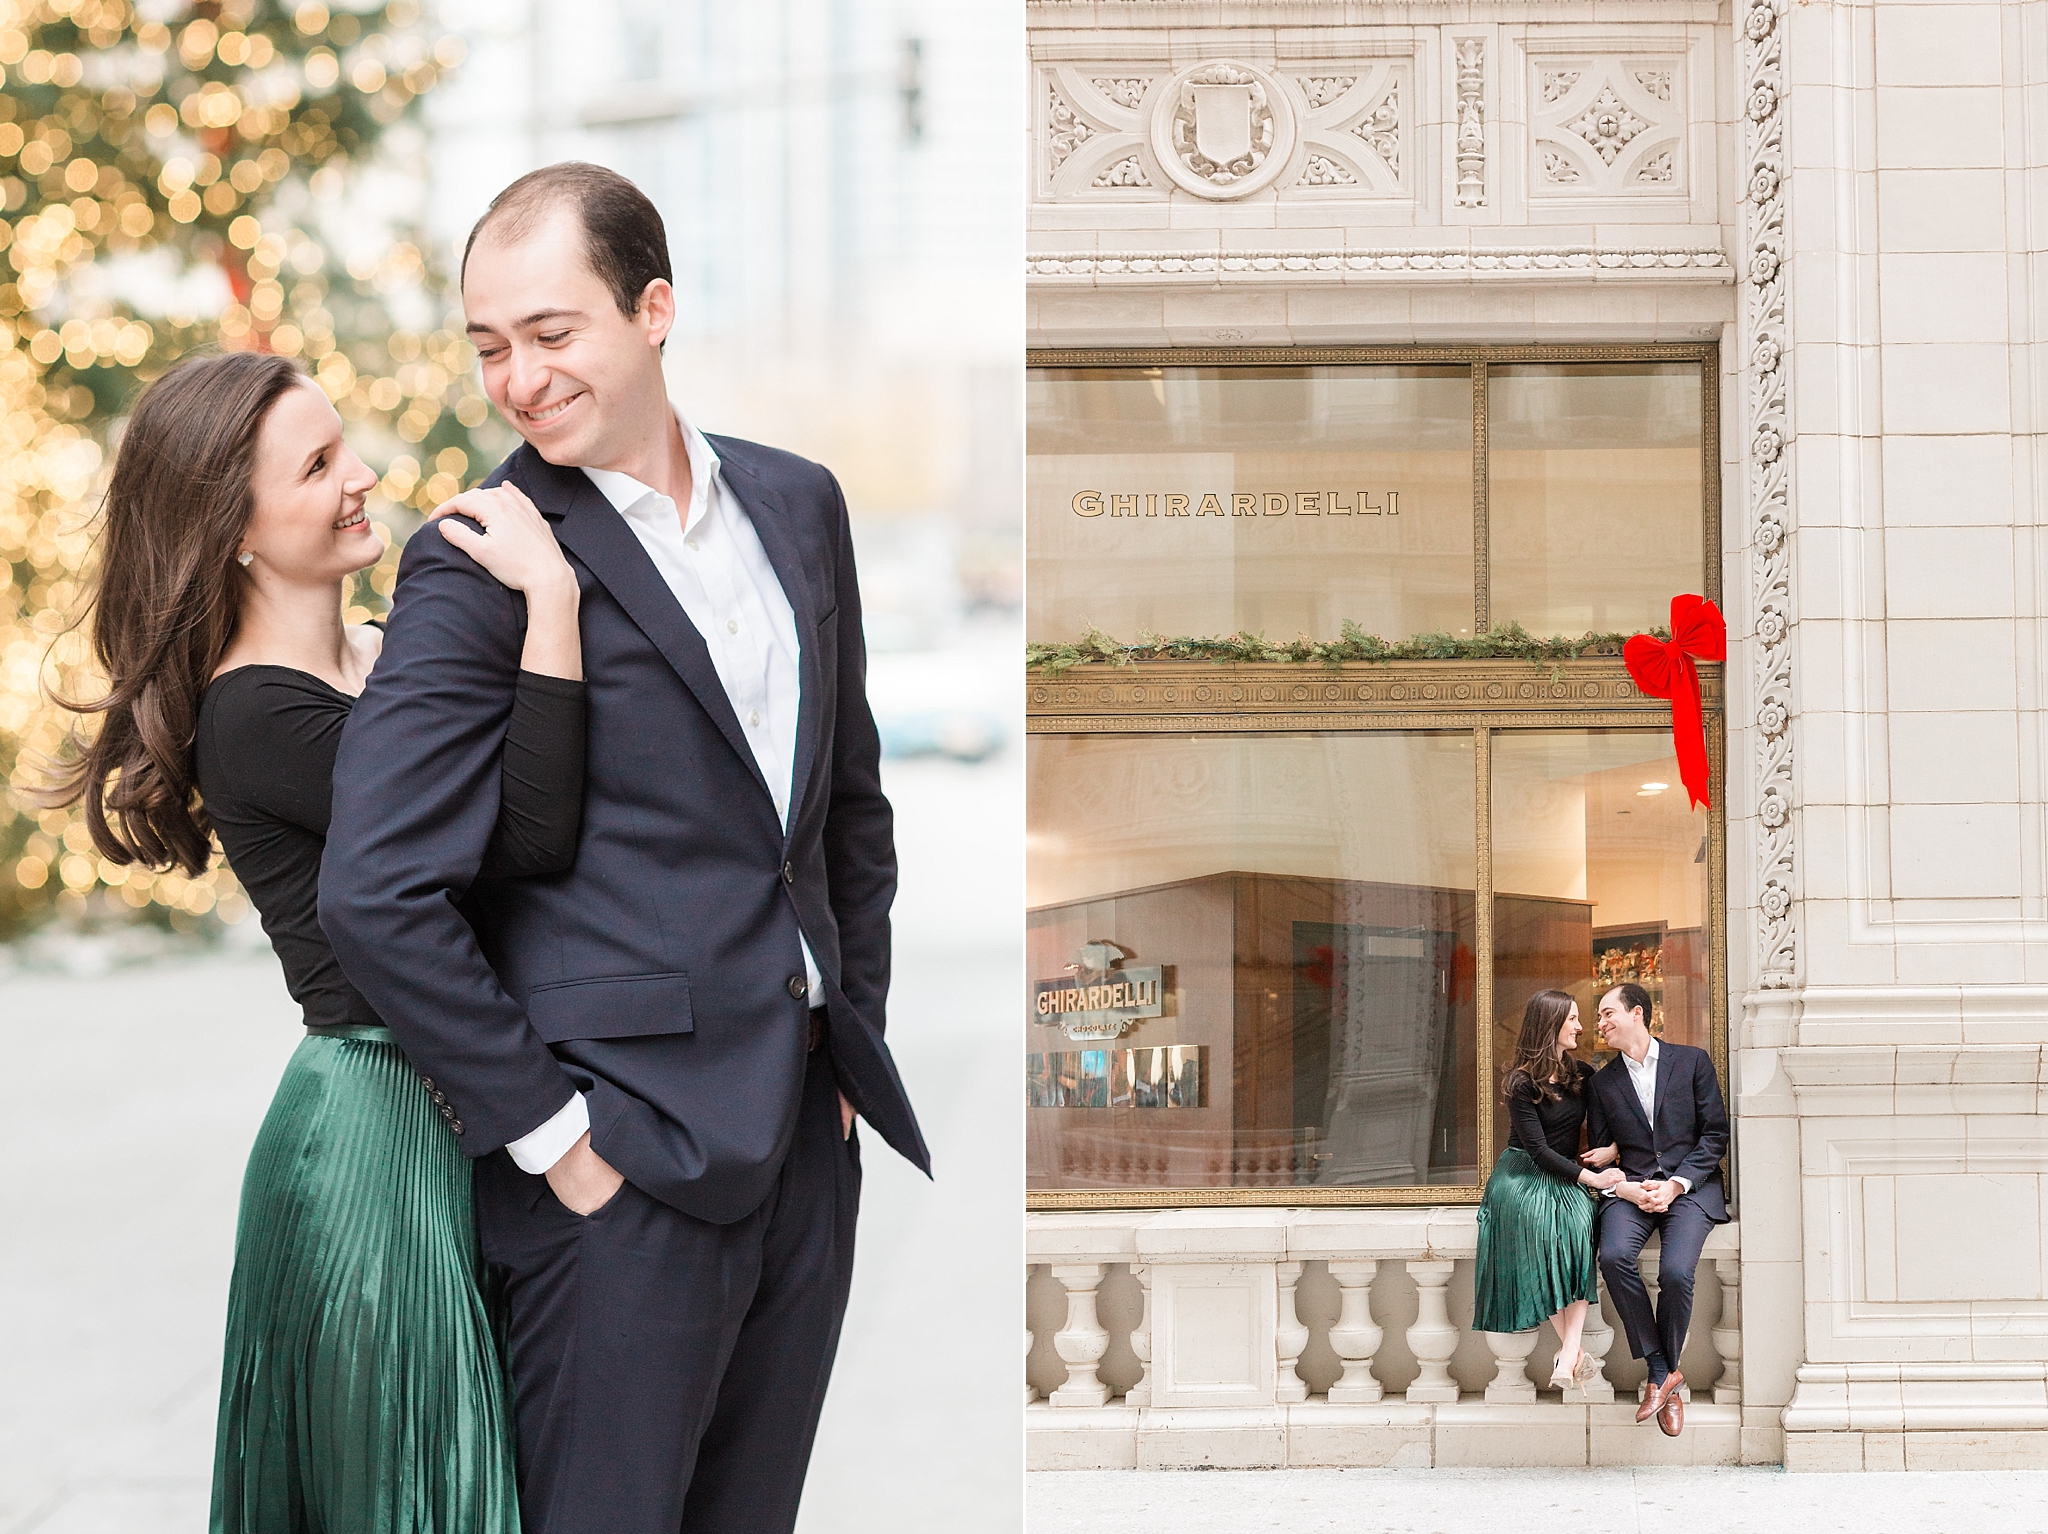 A stylish engagement session in downtown Chicago at iconic sites such as the Wrigley Building, the Riverwalk, and even in the middle of Michigan Avenue!